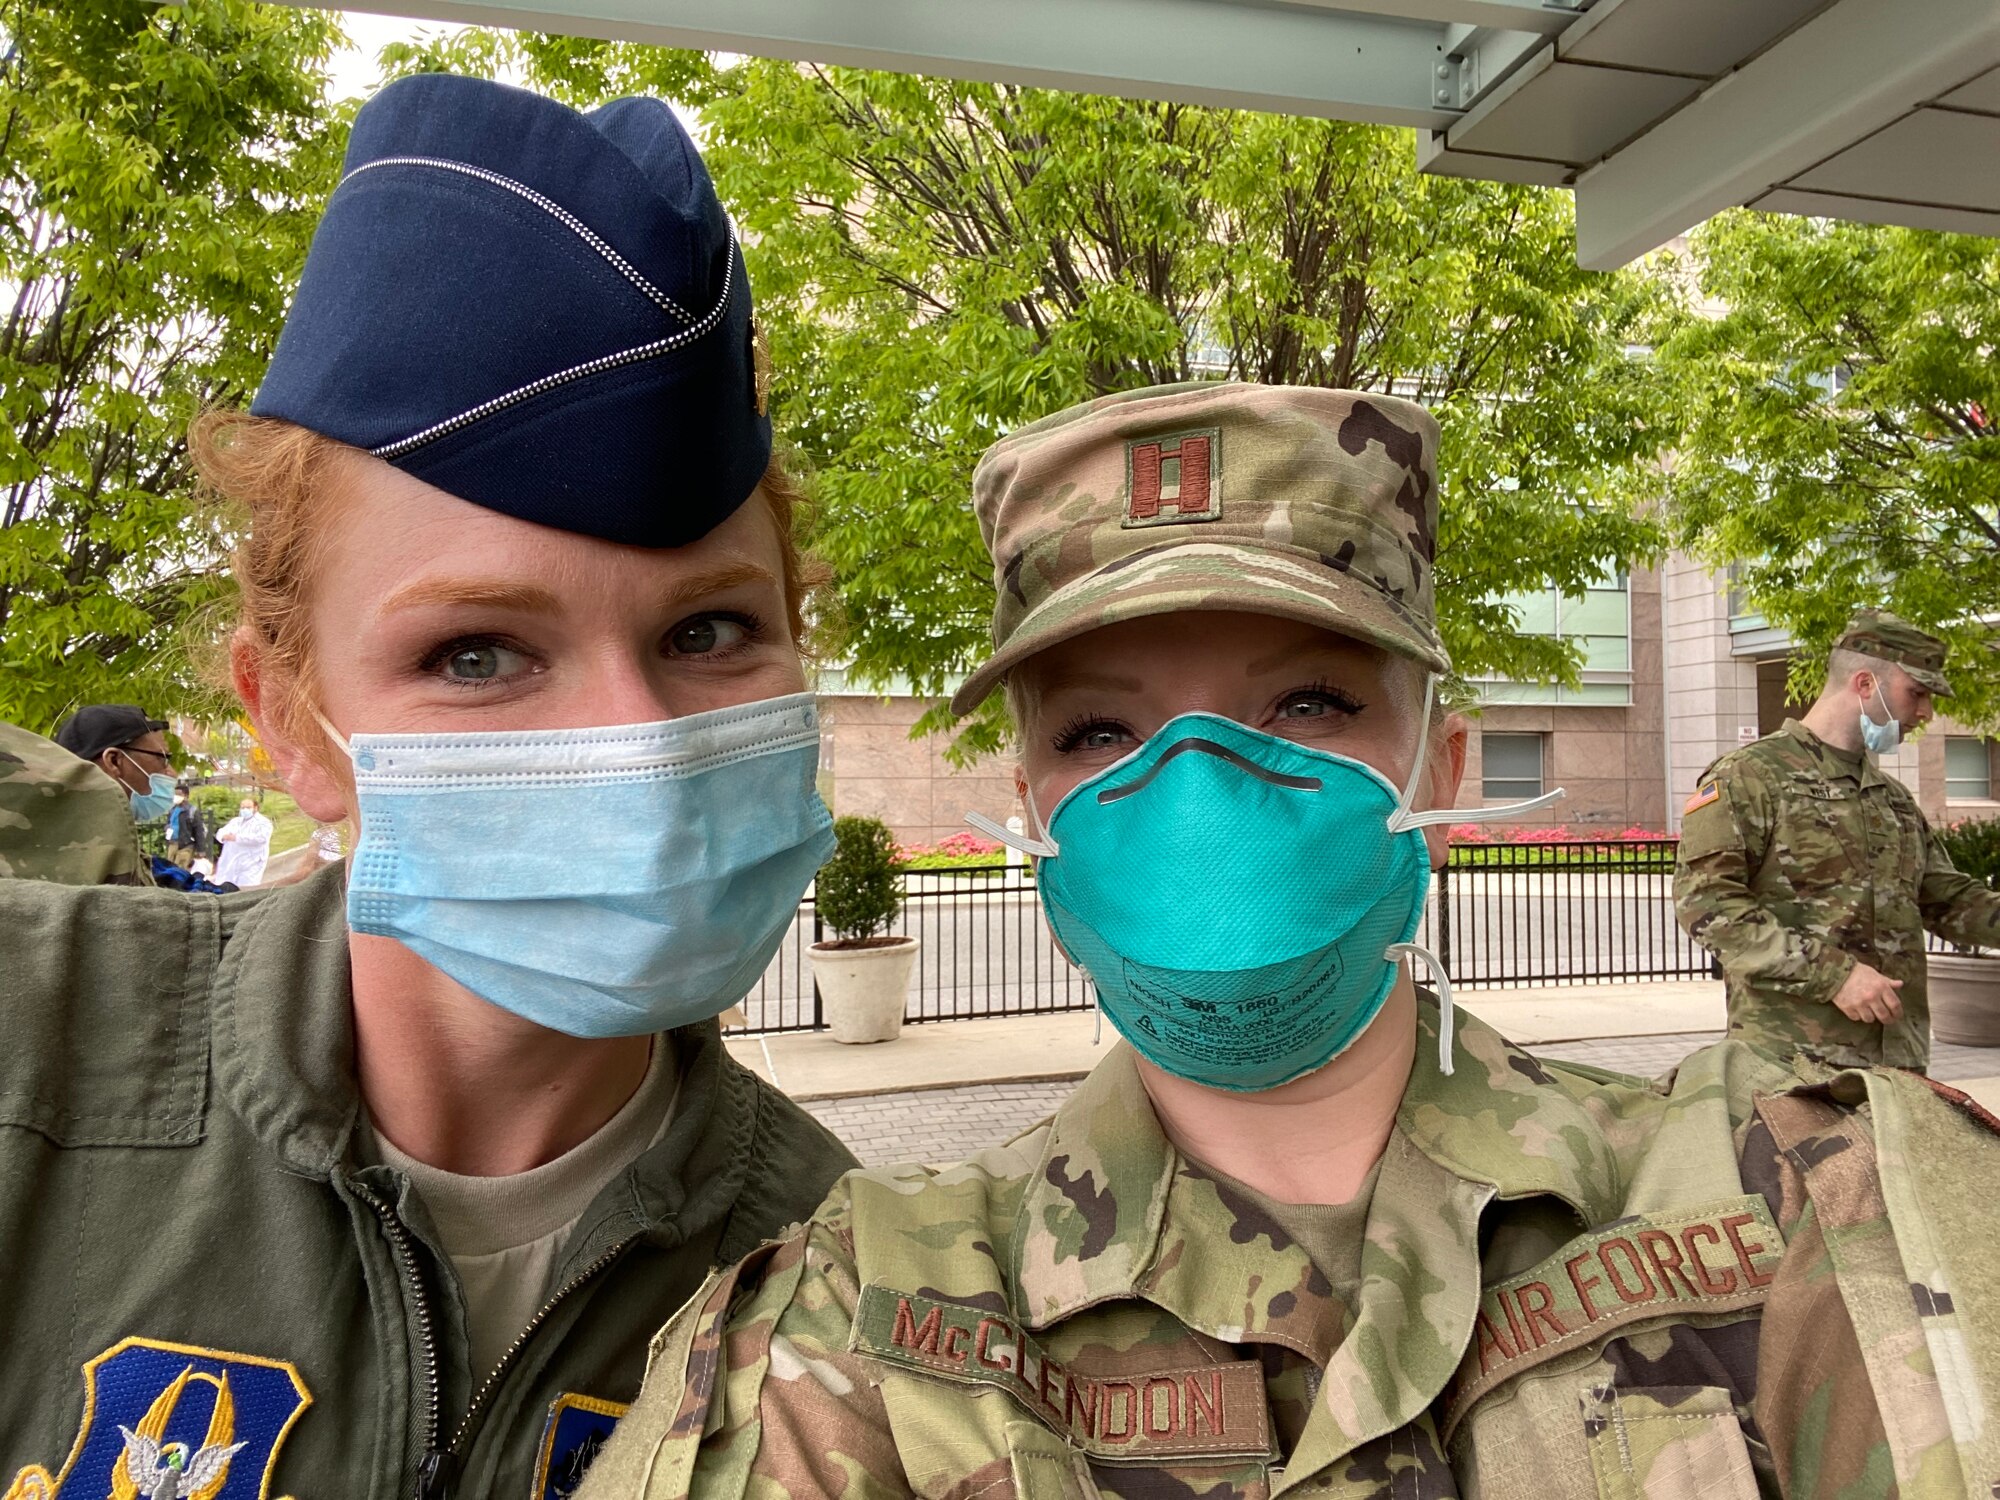 Maj. Carrie Gaddy and Capt. Melinda McClendon pose for a photo together while deployed to a hospital in Queens Hospital in New York as a nurse in support of COVID-19.